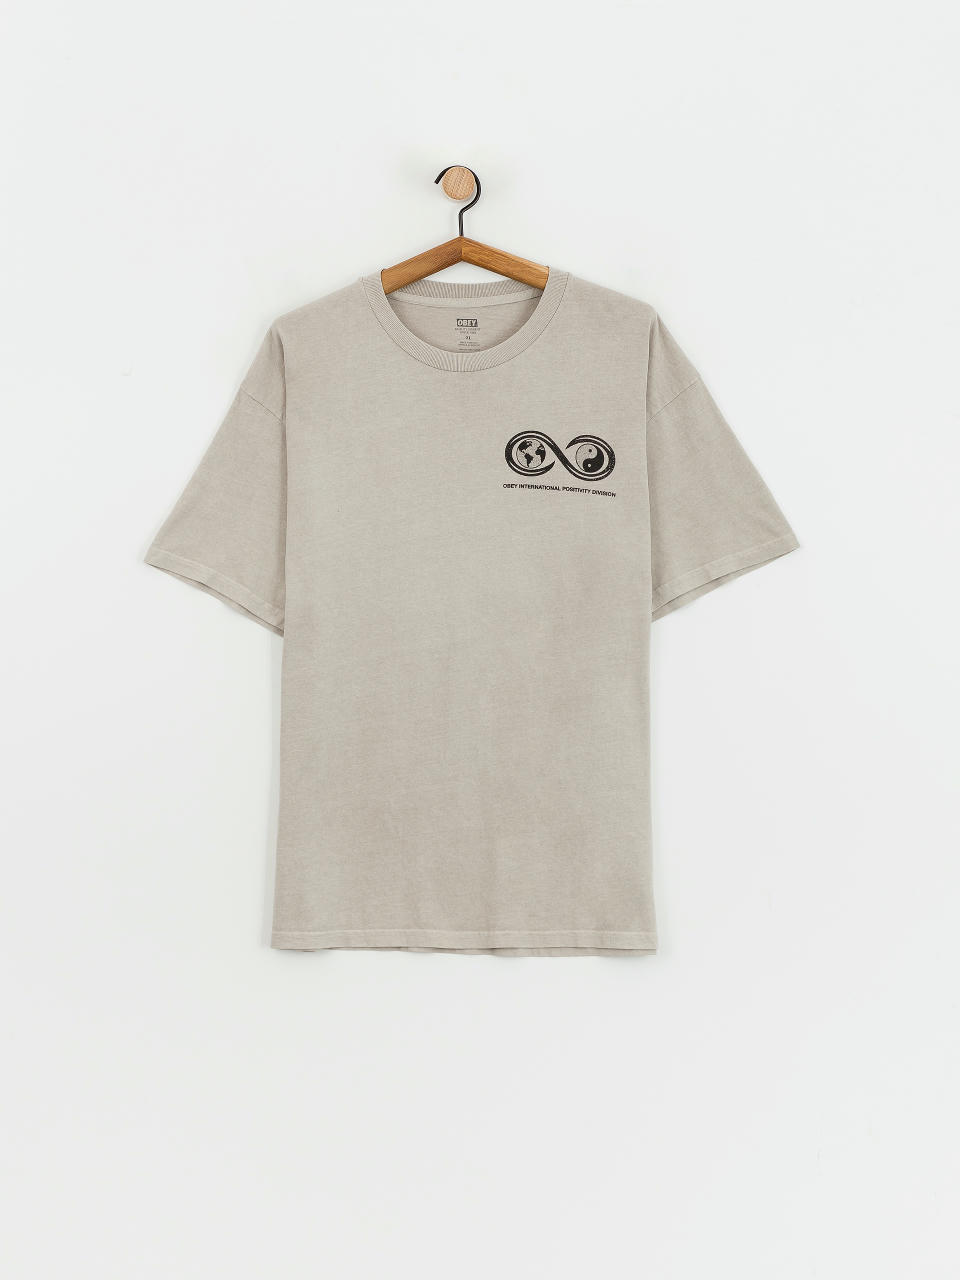 OBEY Life Sentence T-Shirt (pigment silver grey)